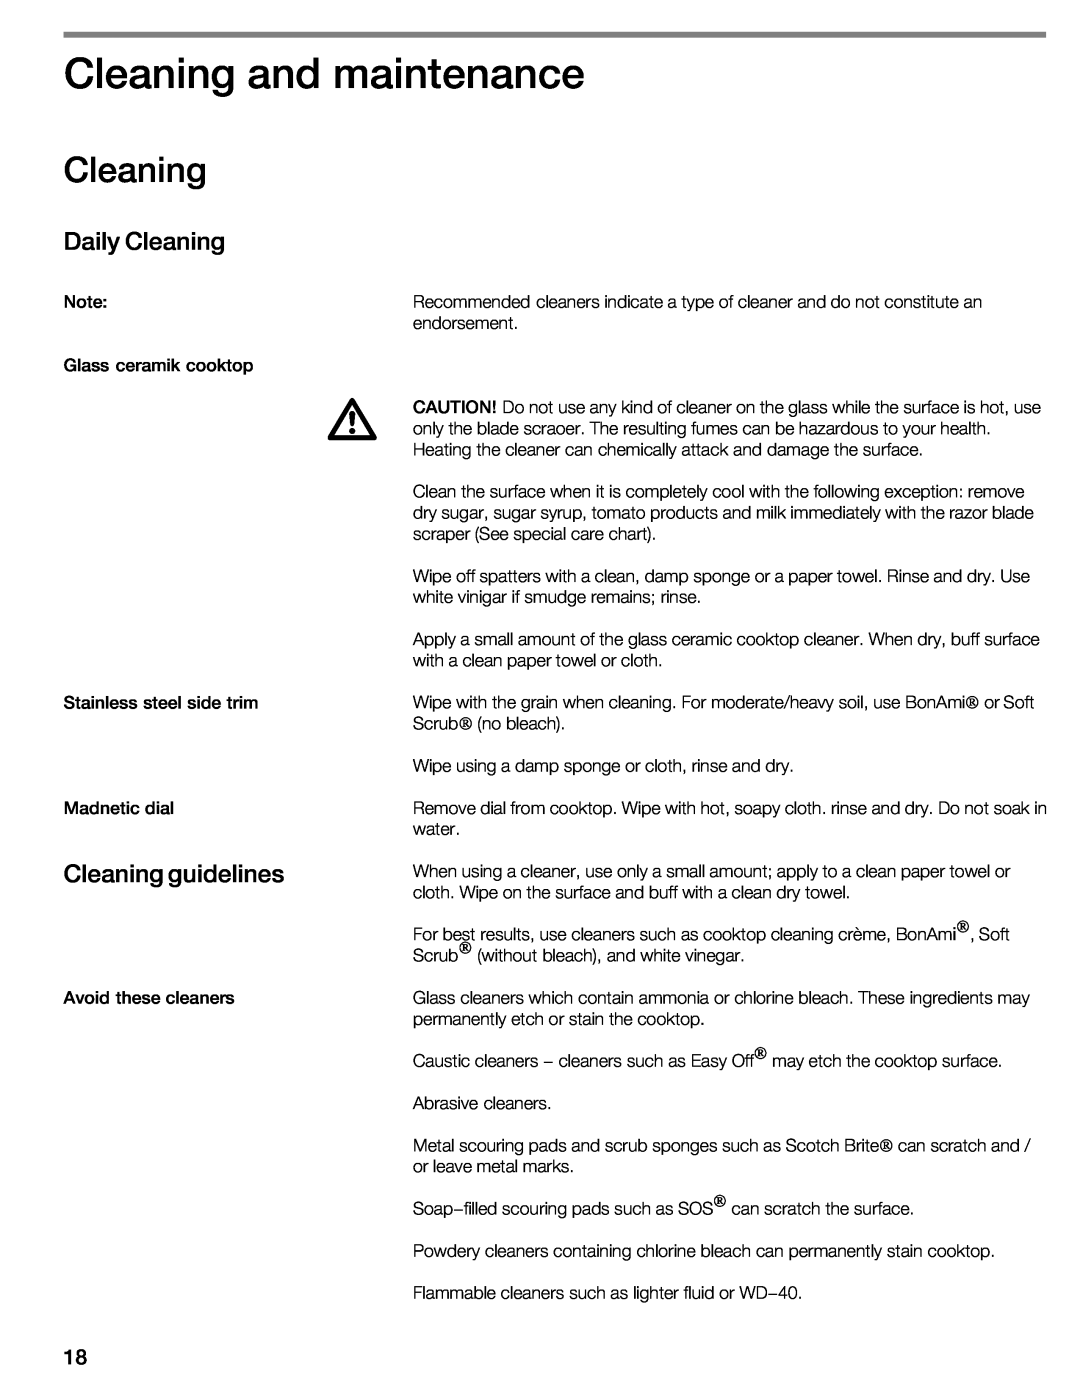 Thermador CIT304E manual Cleaning and maintenance, Daily Cleaning, guidelines 